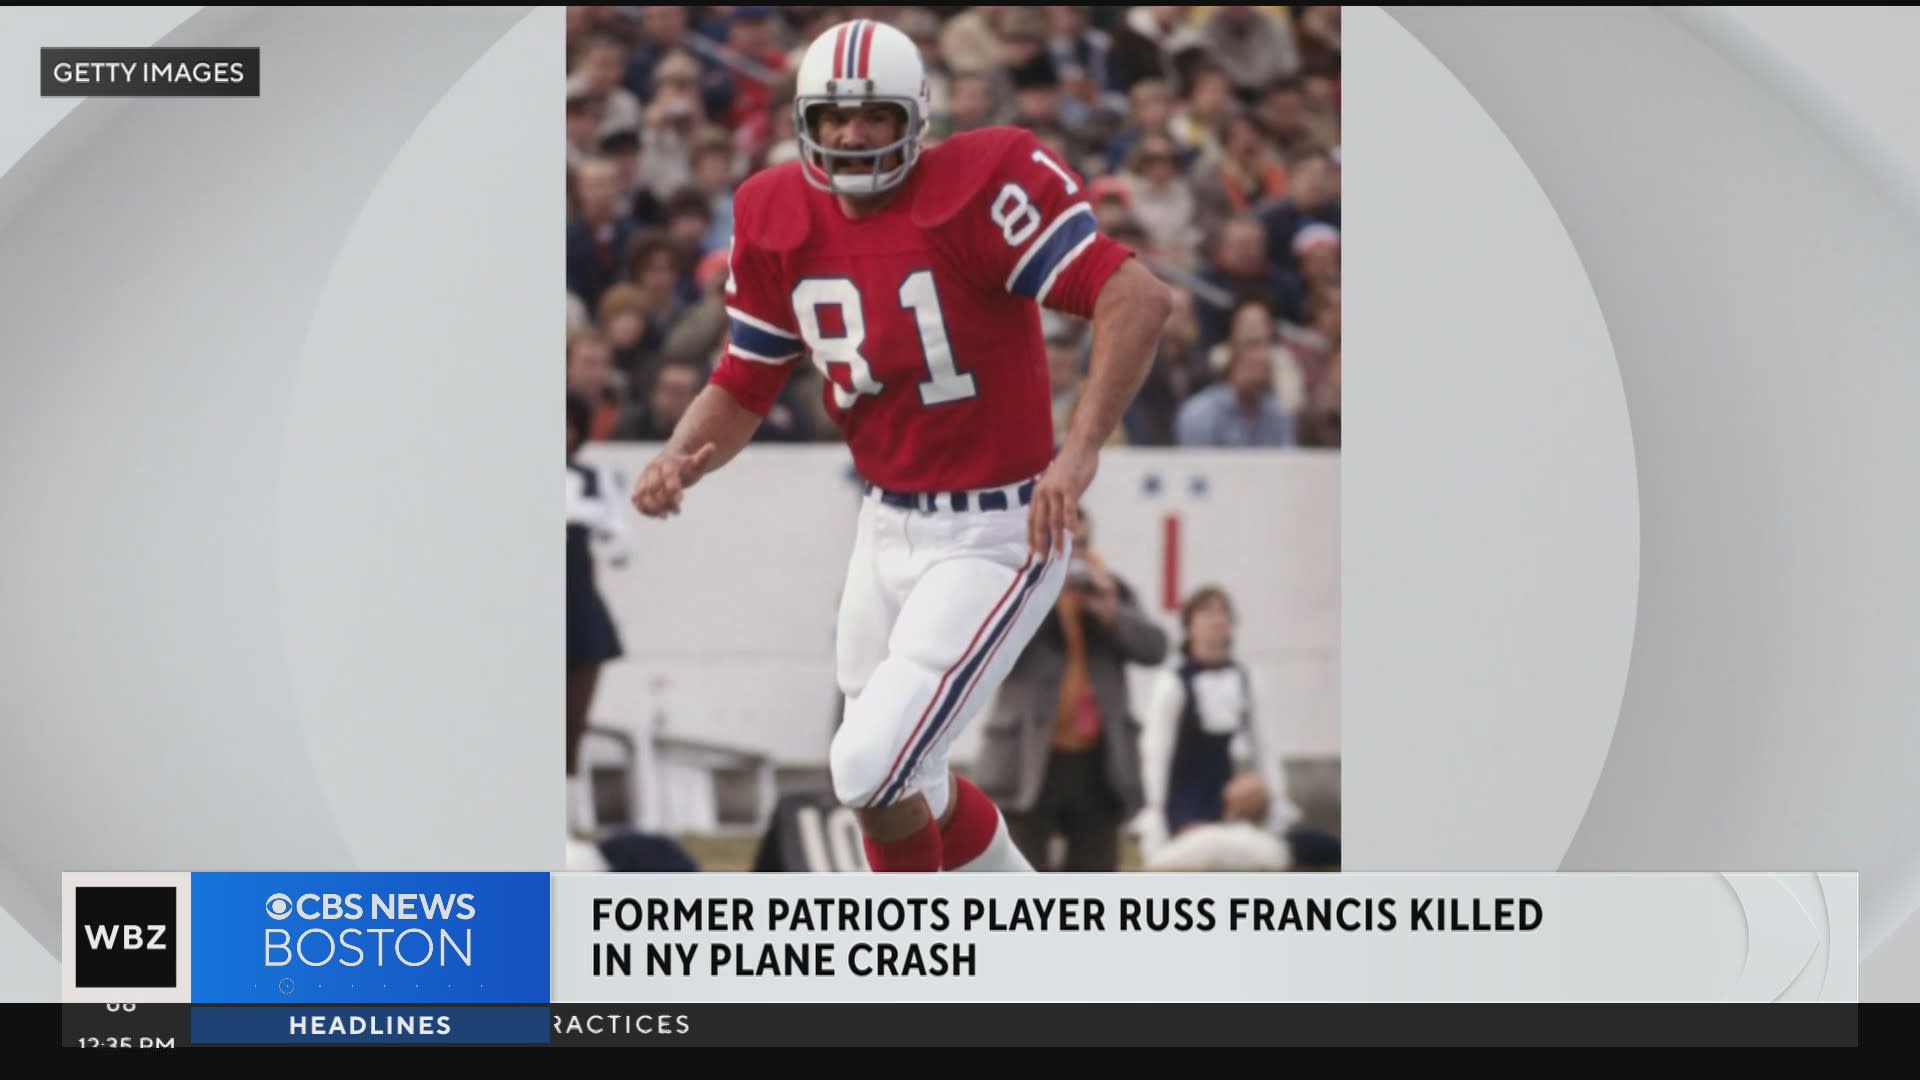 There was power loss before plane crash that killed ex-NFL player Russ  Francis, investigator says